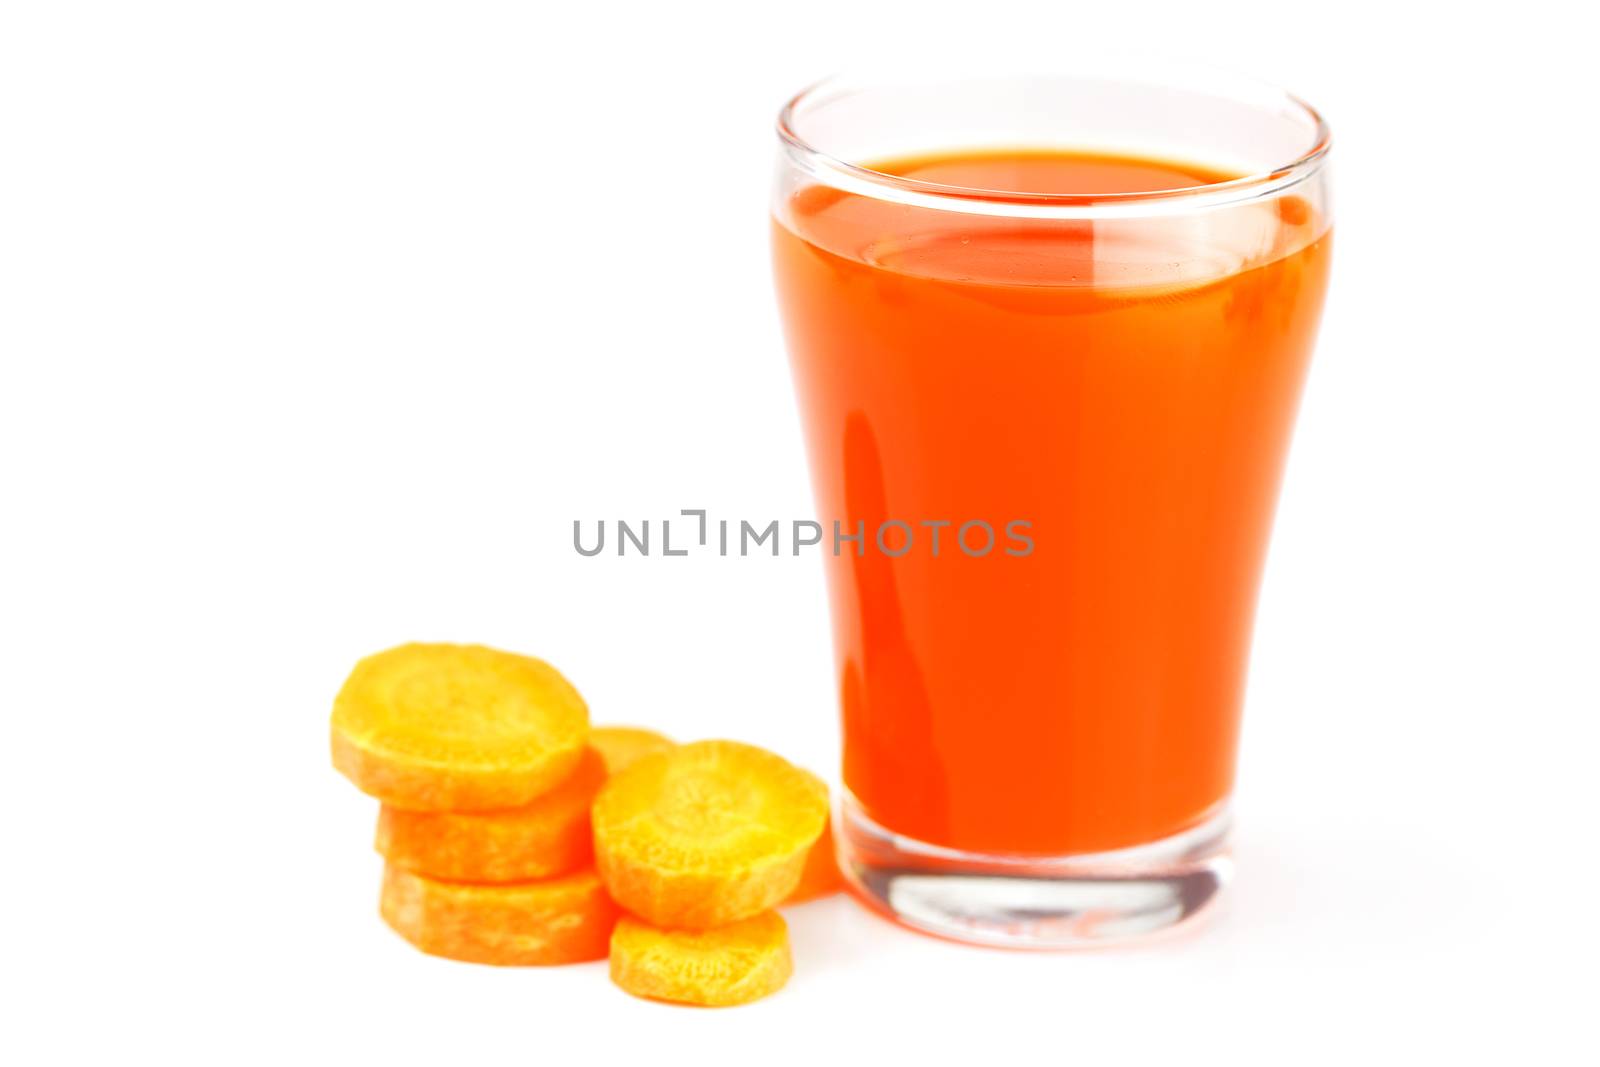 carrot and a glass of carrot juice isolated on white by jannyjus